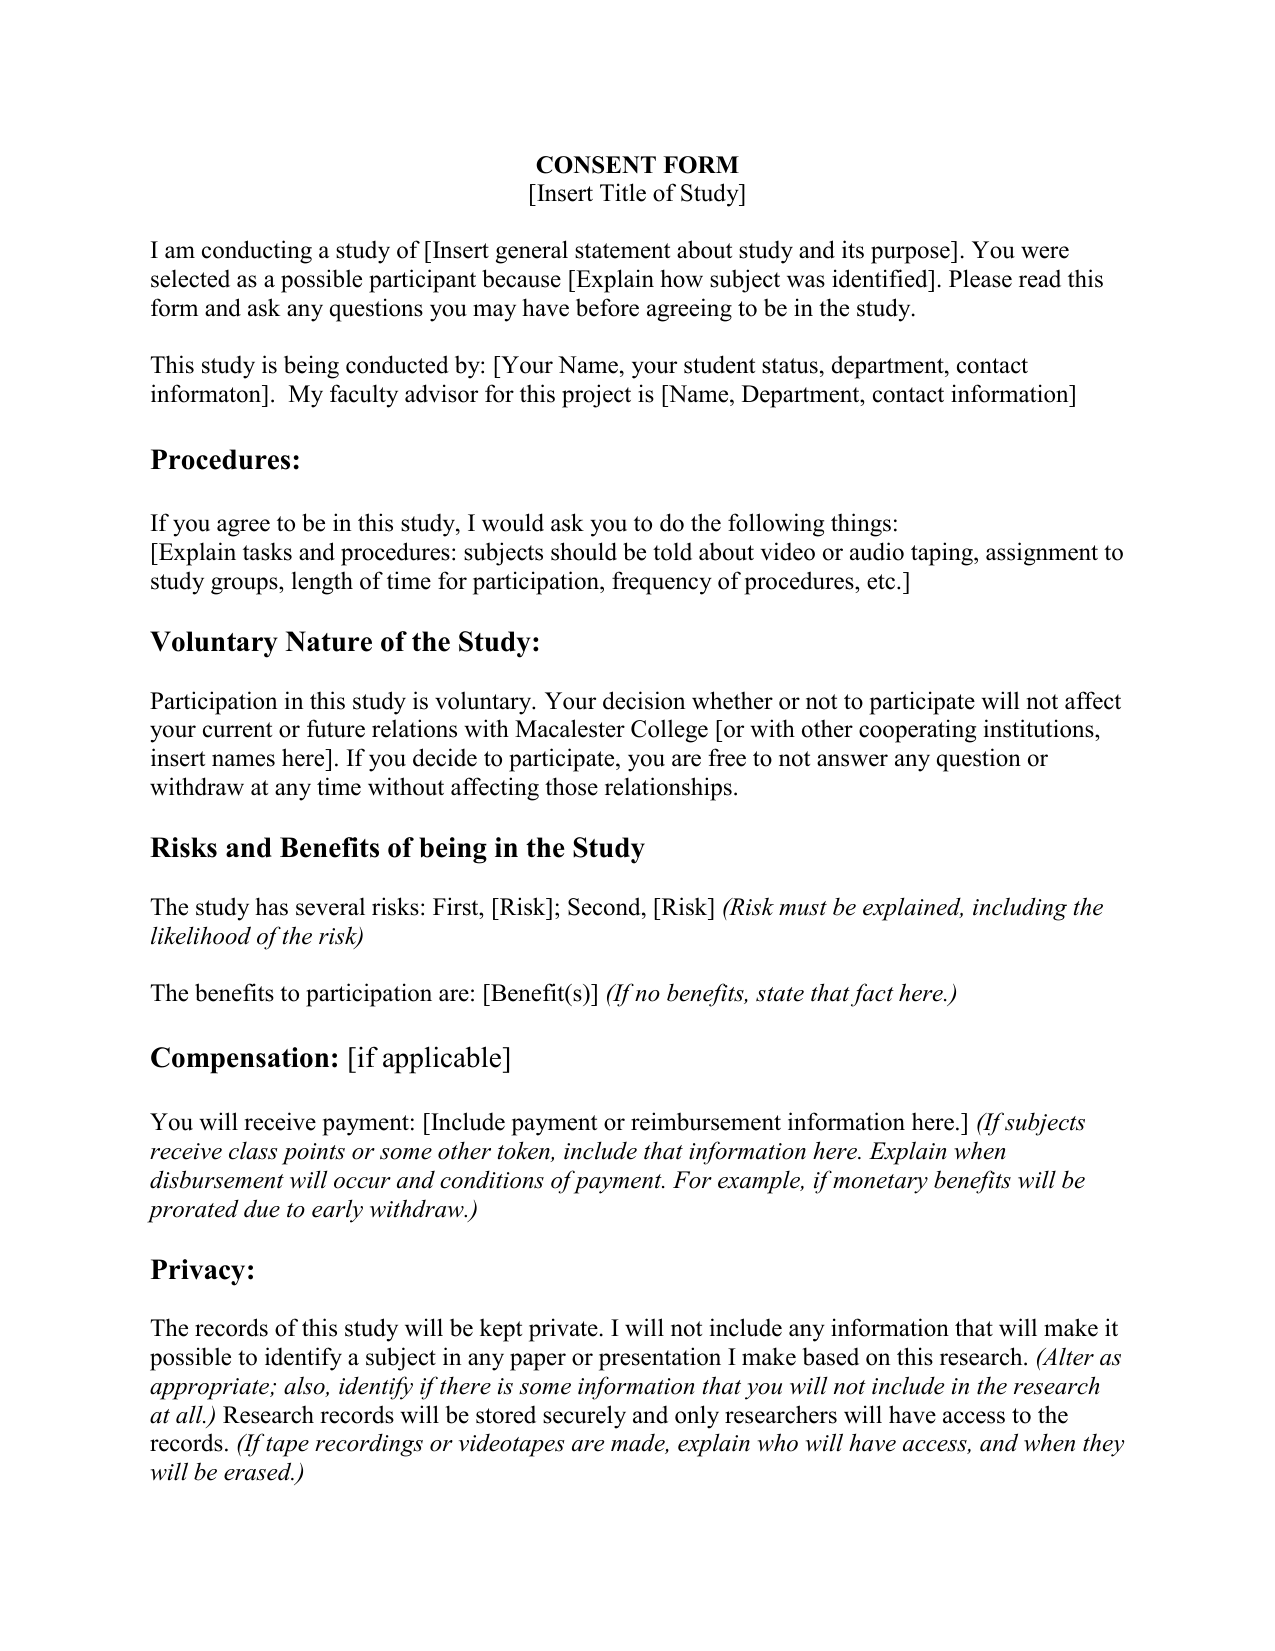 sample-consent-form-for-student-research-proposals